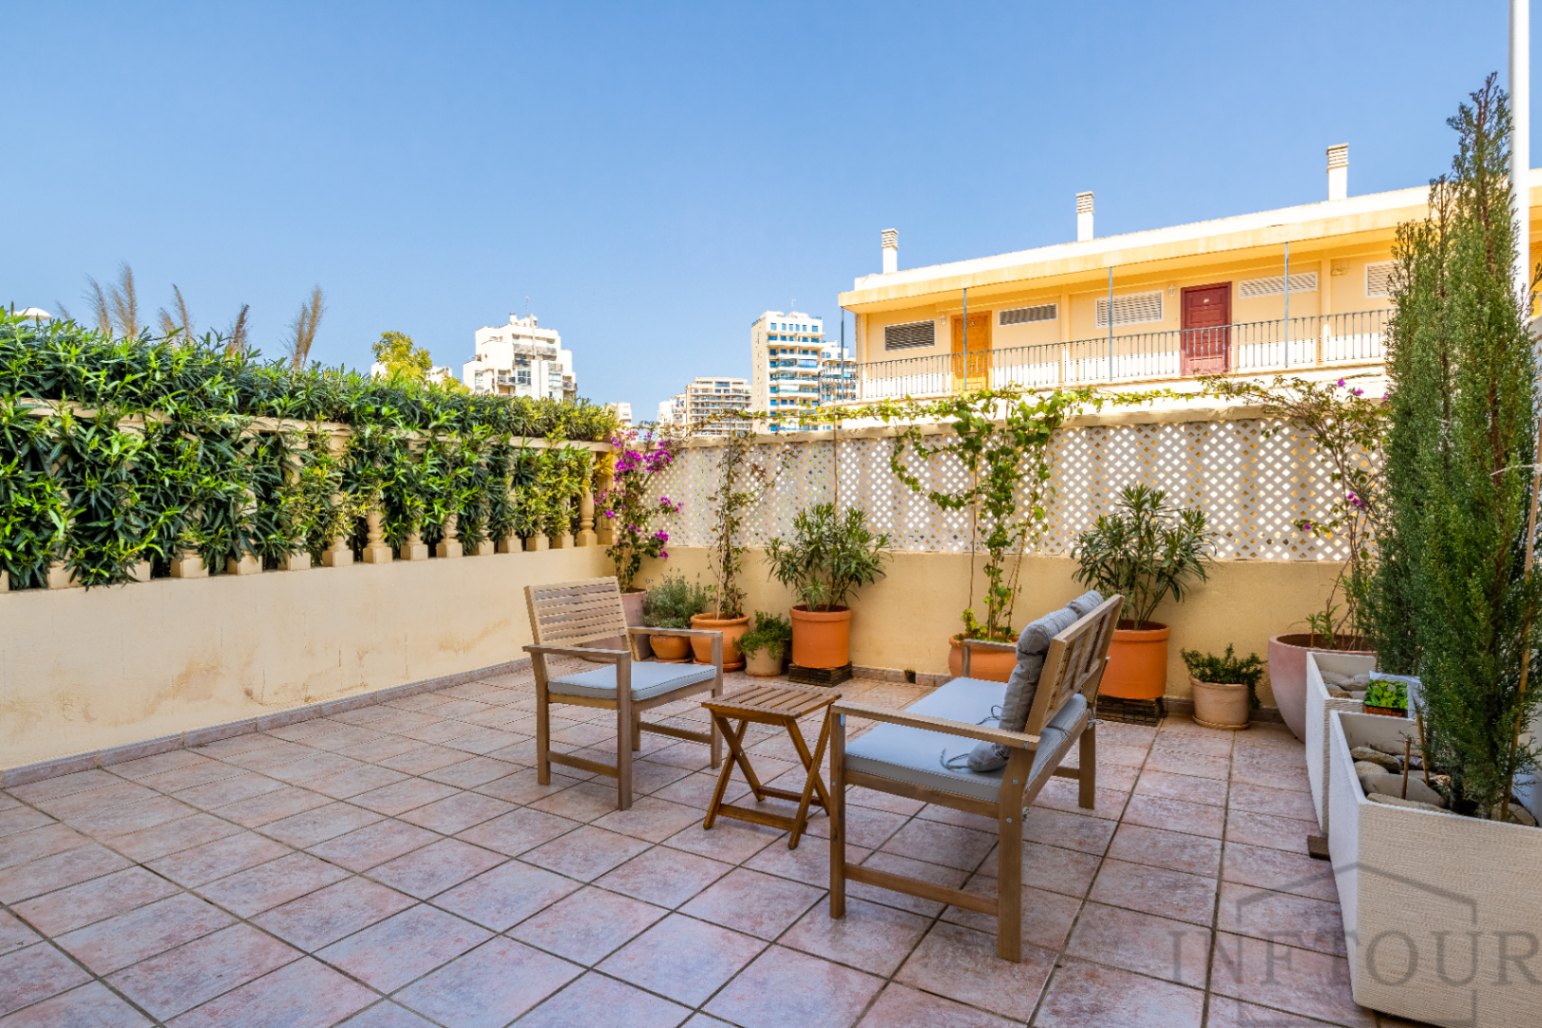 2 bedroom bungalow for sale in Calpe, manzanera